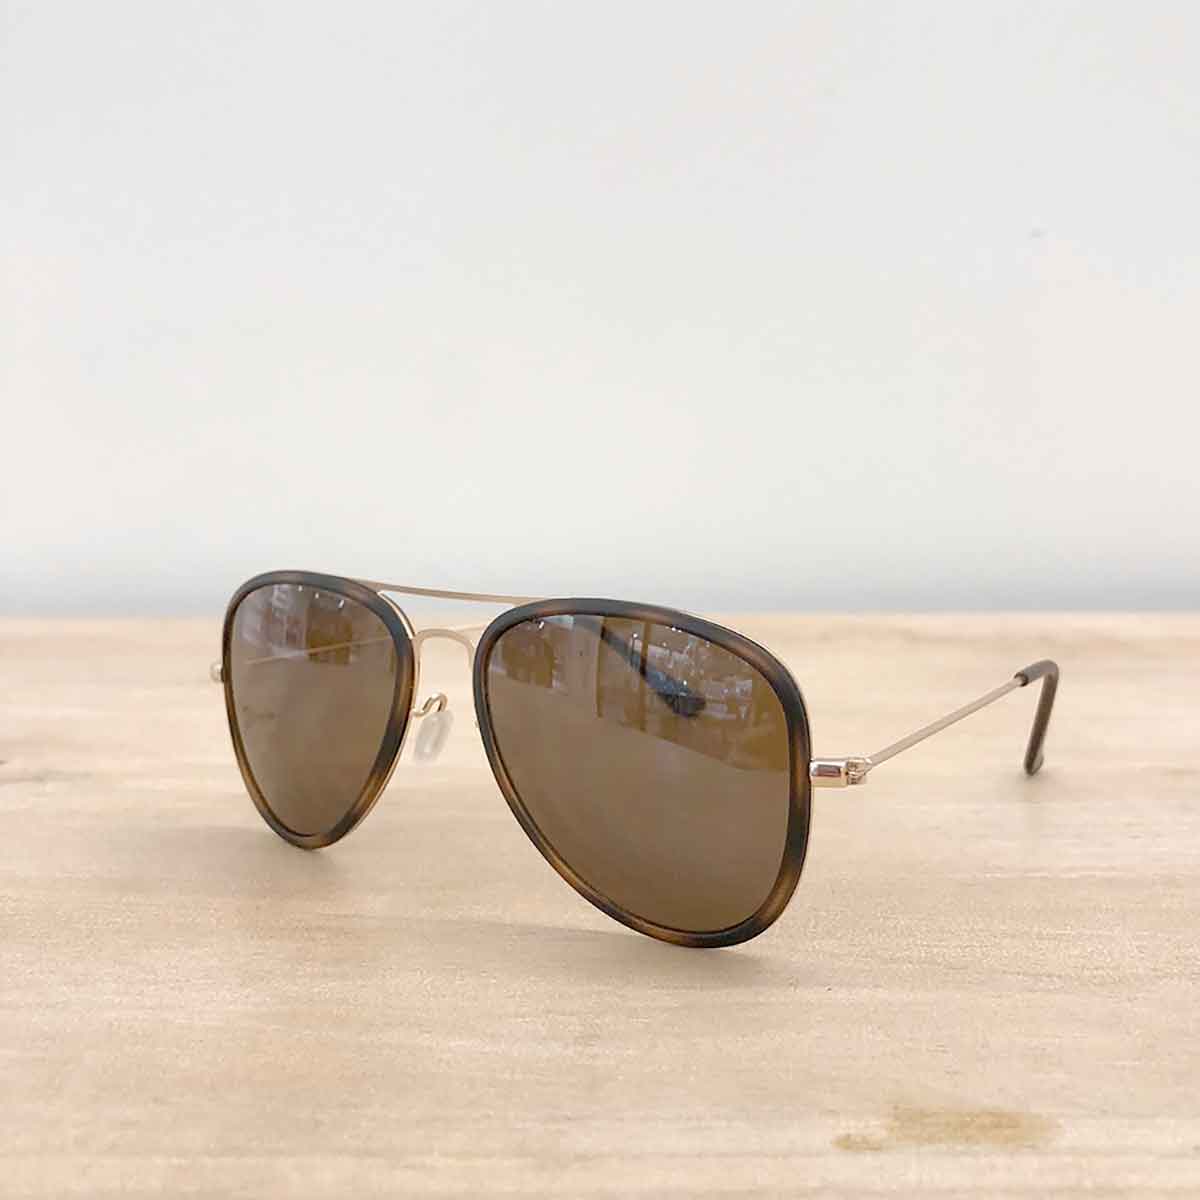 Langley Sunglasses   Tortoise/Brown   One Size